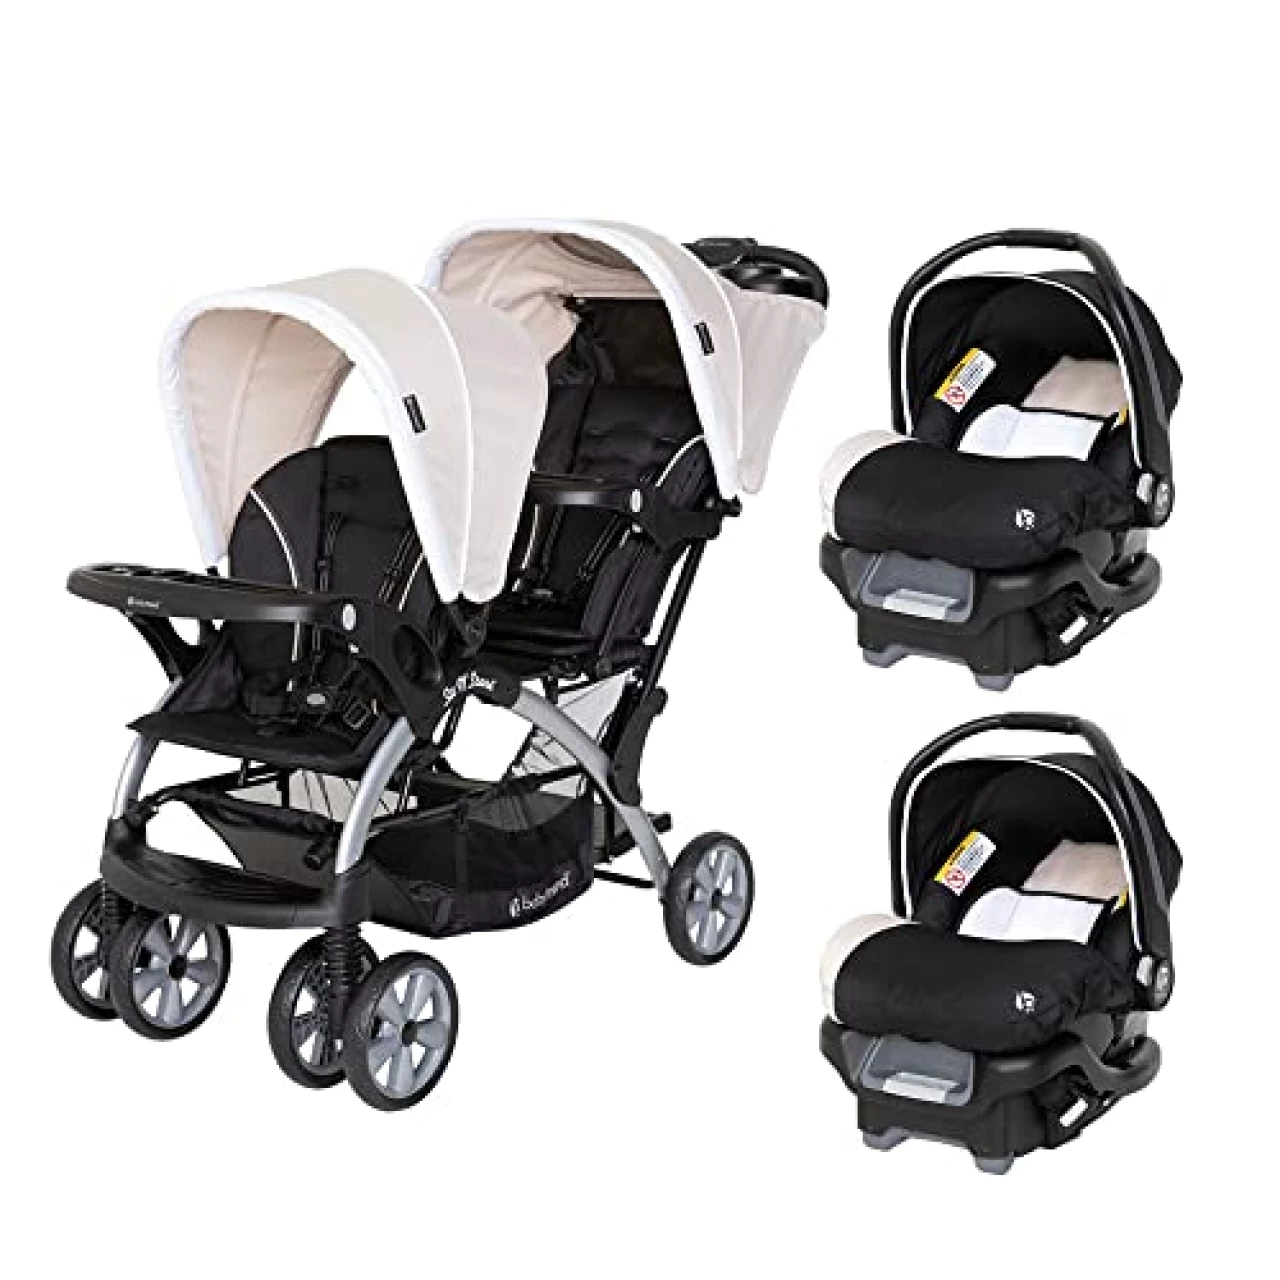 Baby Trend Sit N Stand Easy Fold Travel Double Baby Stroller and 2 Single Infant Car Seats Travel System